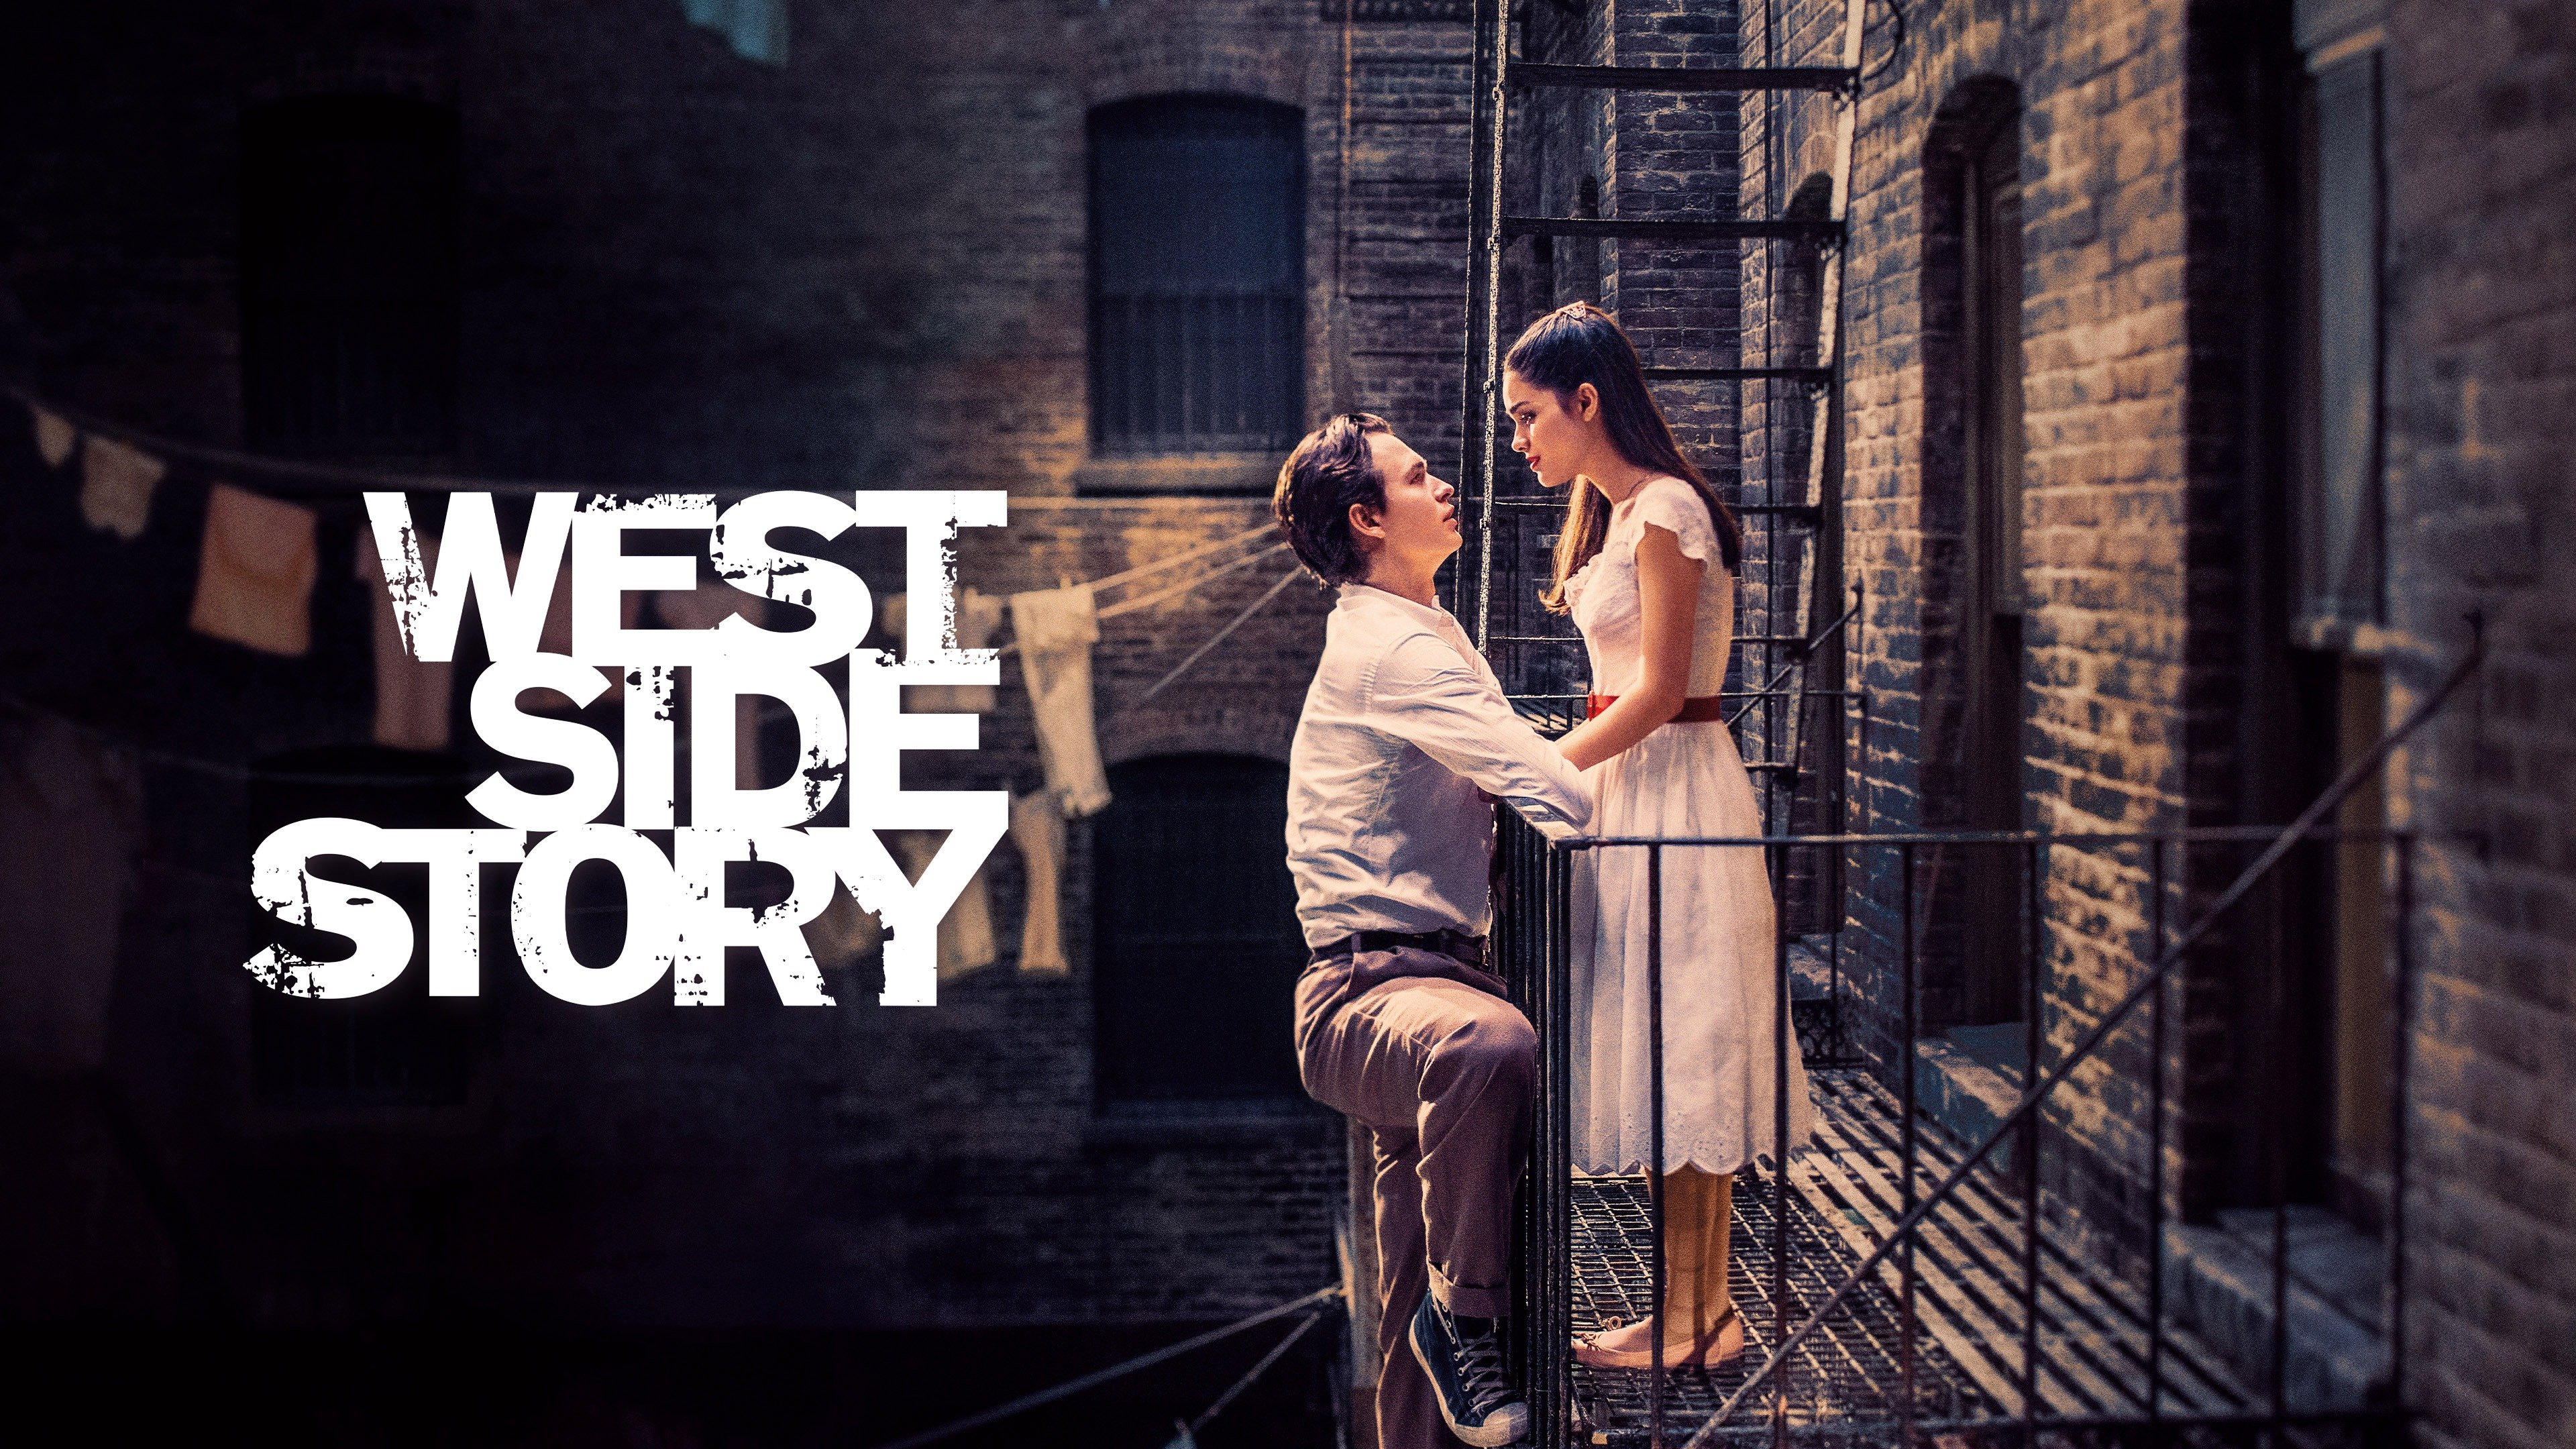 20 West Side Story 2021 HD Wallpapers and Backgrounds 3840x2160